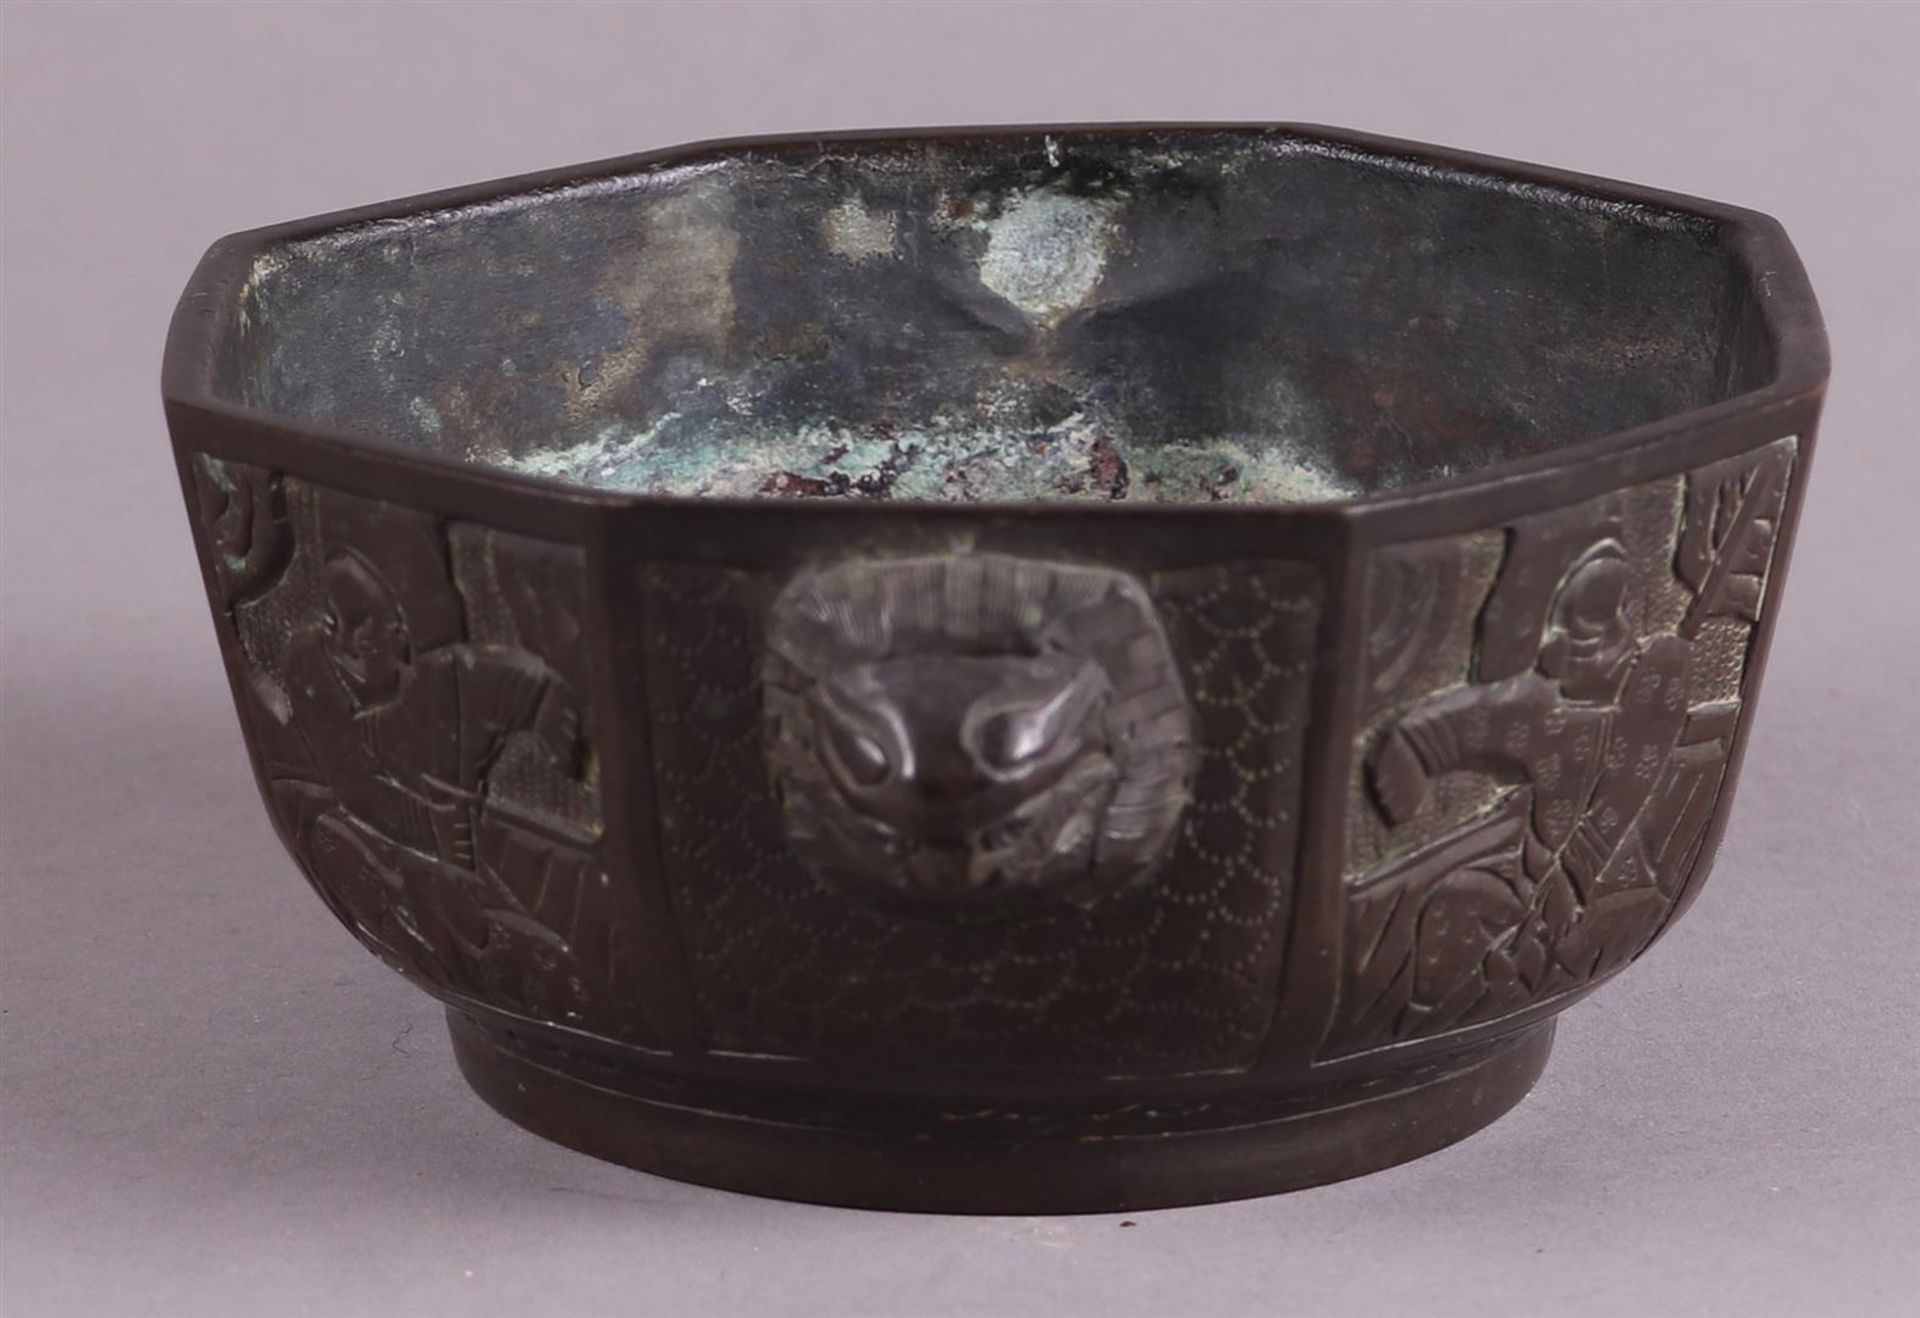 A bronze incense burner decorated with various figures. China, 19/20th century. - Image 2 of 4